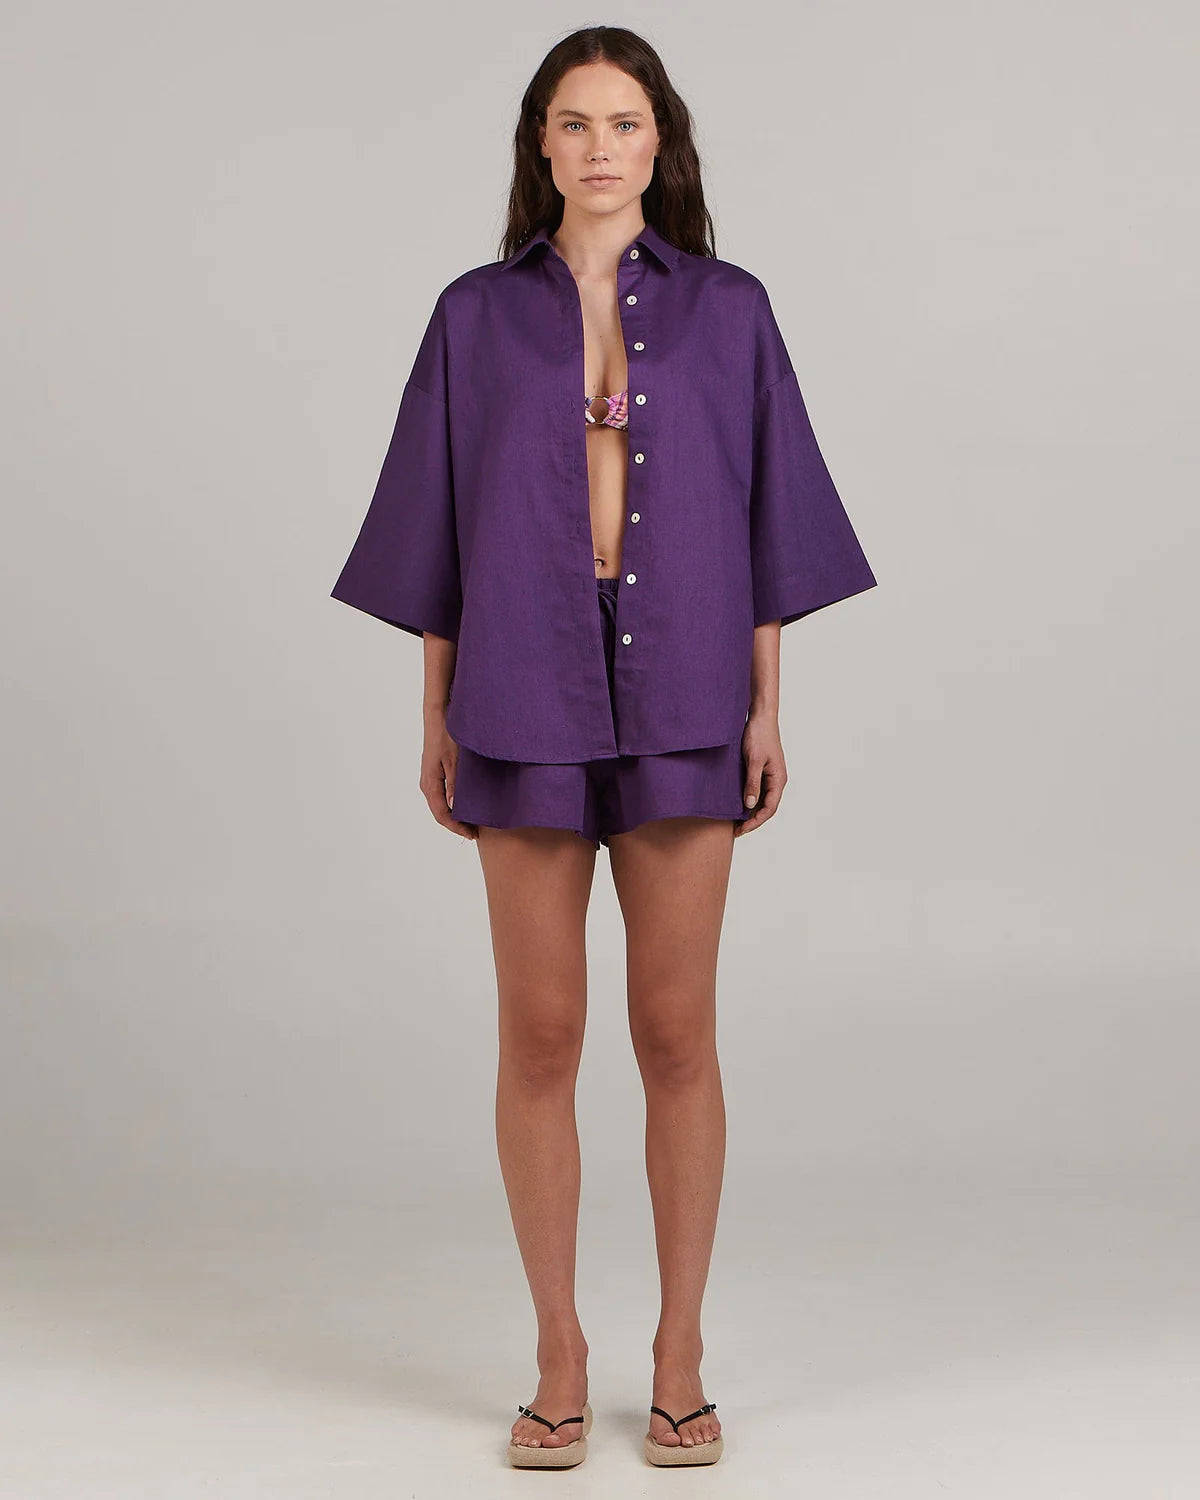 In a relaxed fit and saturated purple hue, this linen-blend short is all comfort and style. Wear with the coordinating Harlow shirt for weekend hangs.